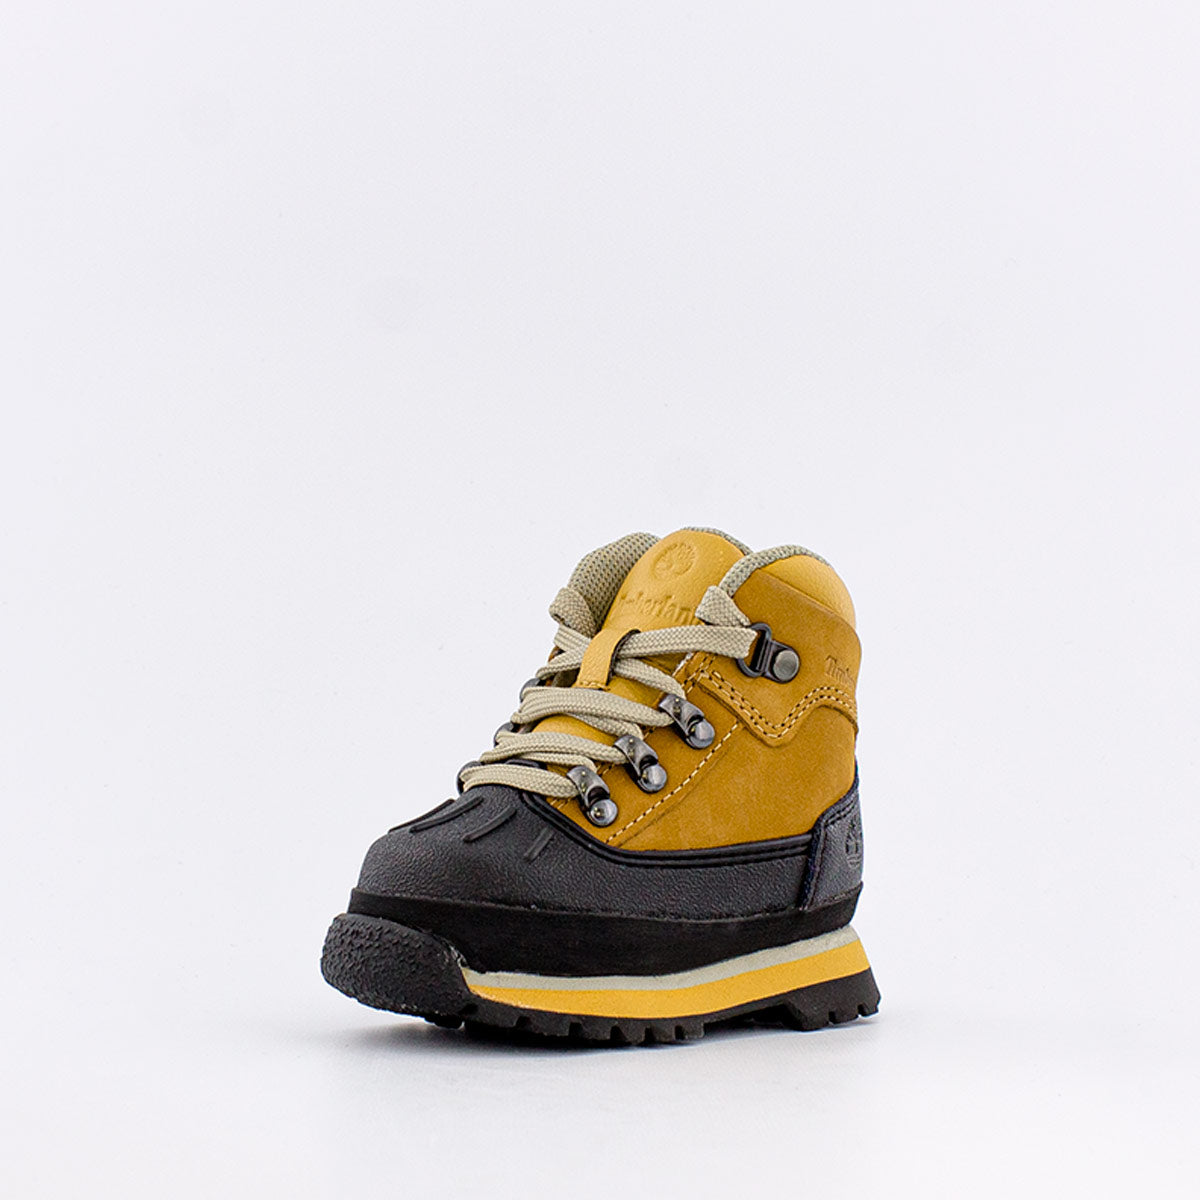 Timberland Euro Hiker Shell Toe Boot (Infant/Toddler)